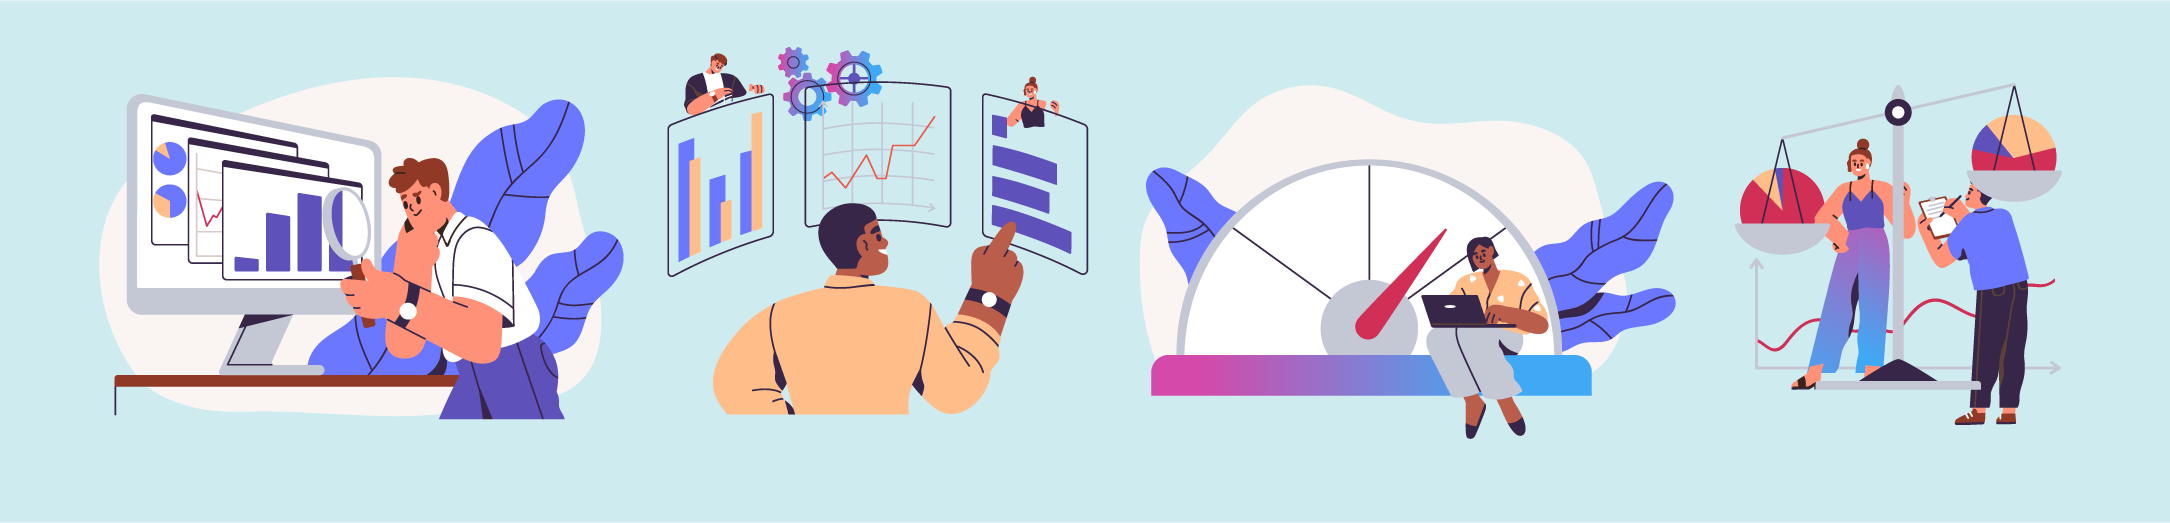 Vector illustration of Performance Testing: Comparing business process, indicators, KPI, performance metrics. Measuring, testing with analysis charts, measuring speed and performance.